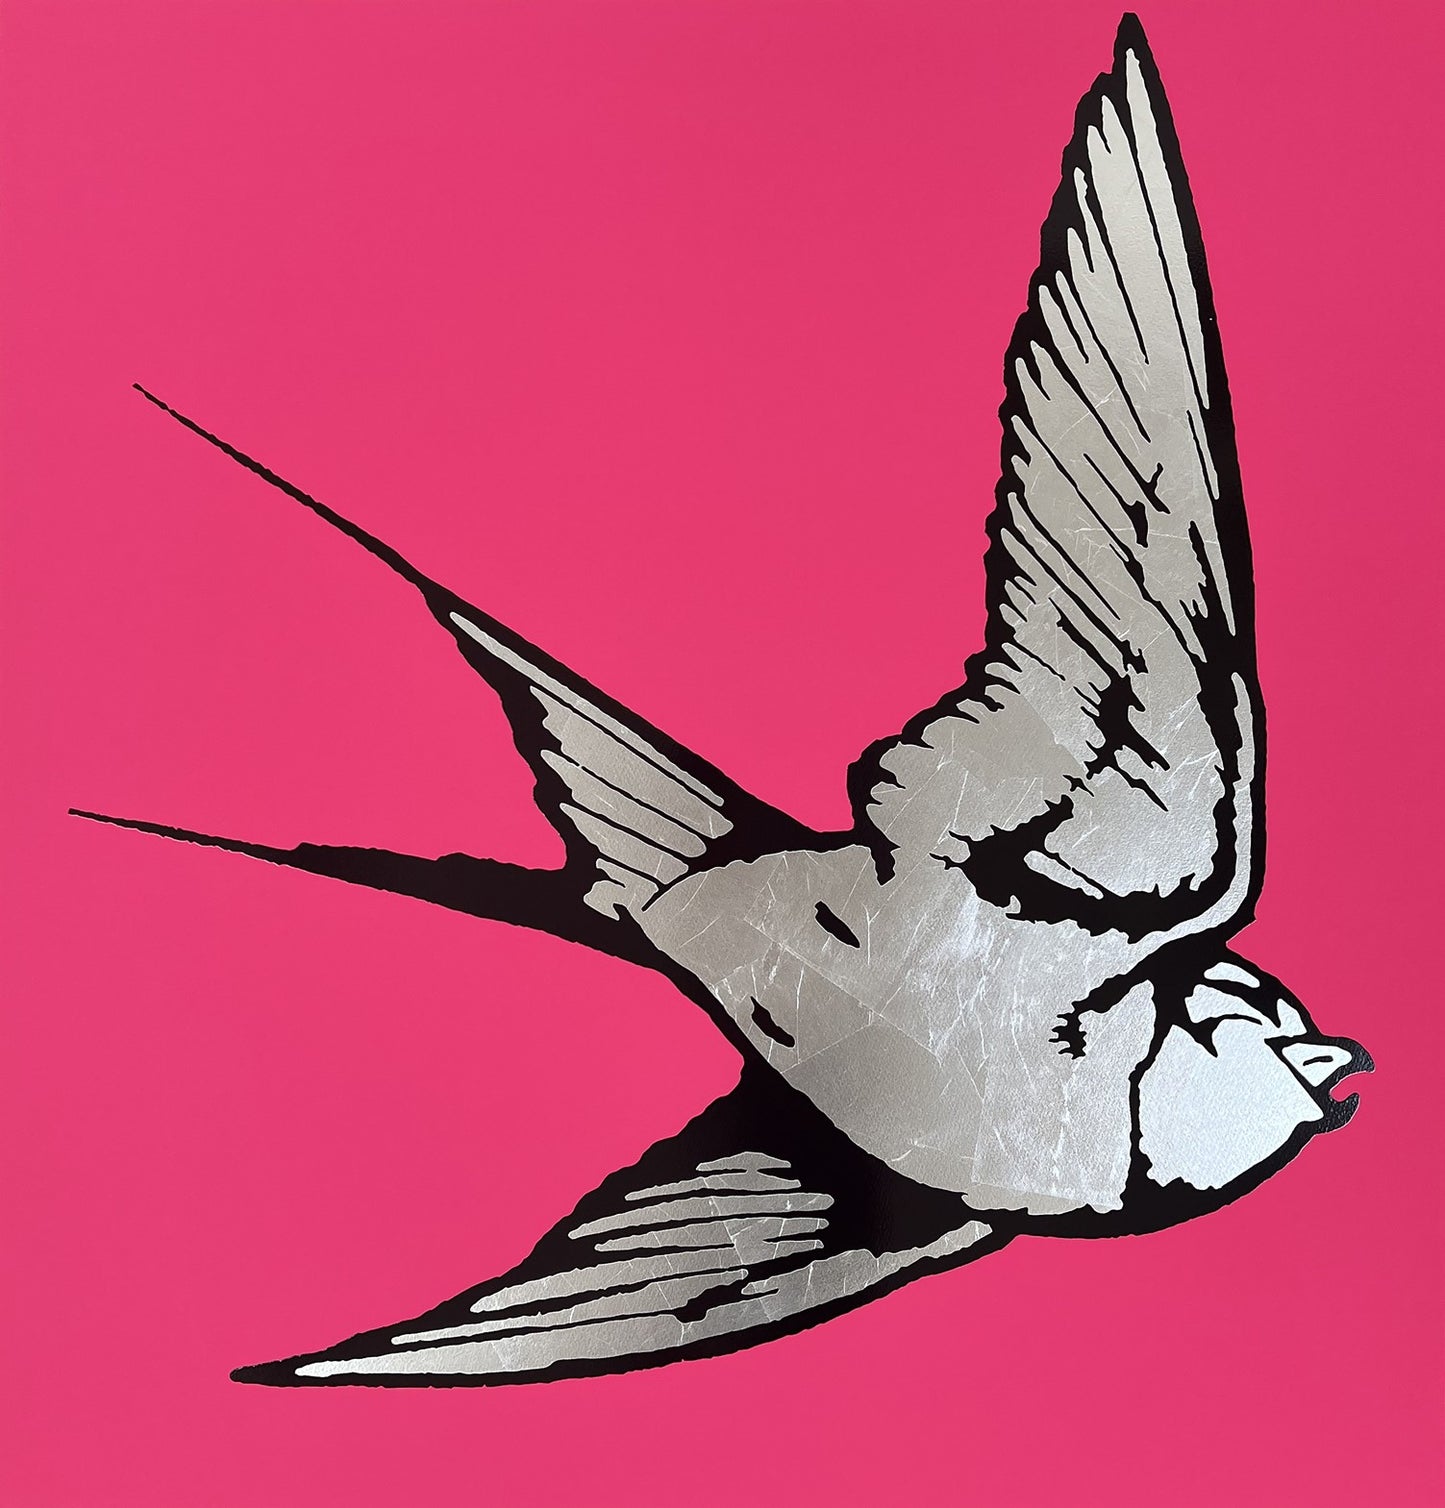 Dan Baldwin, Love and Light Deluxe Pink, Gold Leaf, Colour, Swallow, Bird, TAP Galleries, Essex Chelmsford Art Gallery 